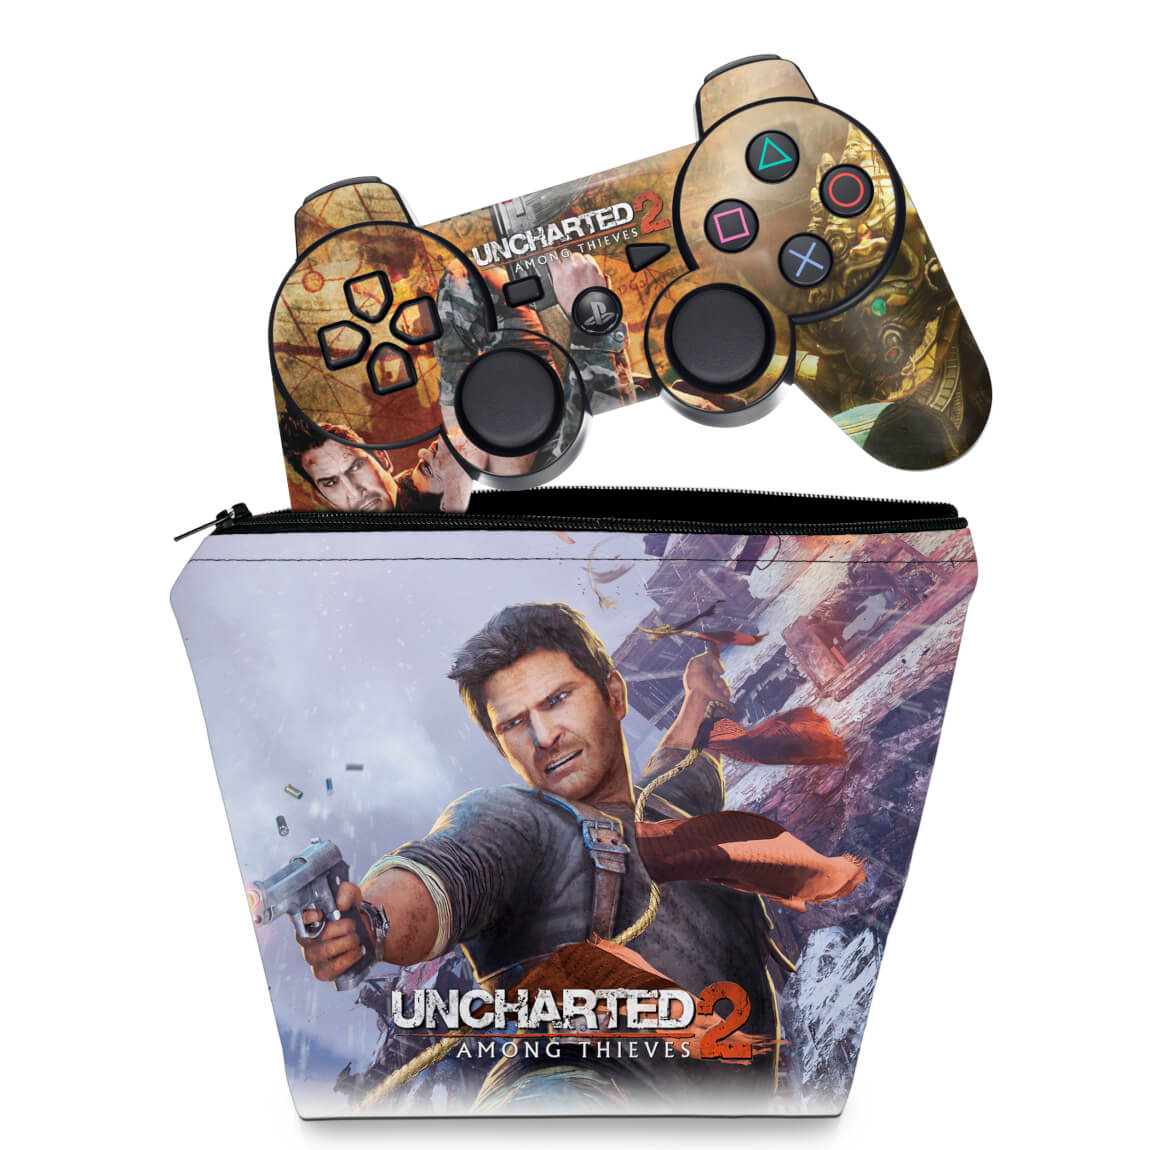 Uncharted 2 Among Thieves  PS3 vs PS4 (Which One is Better